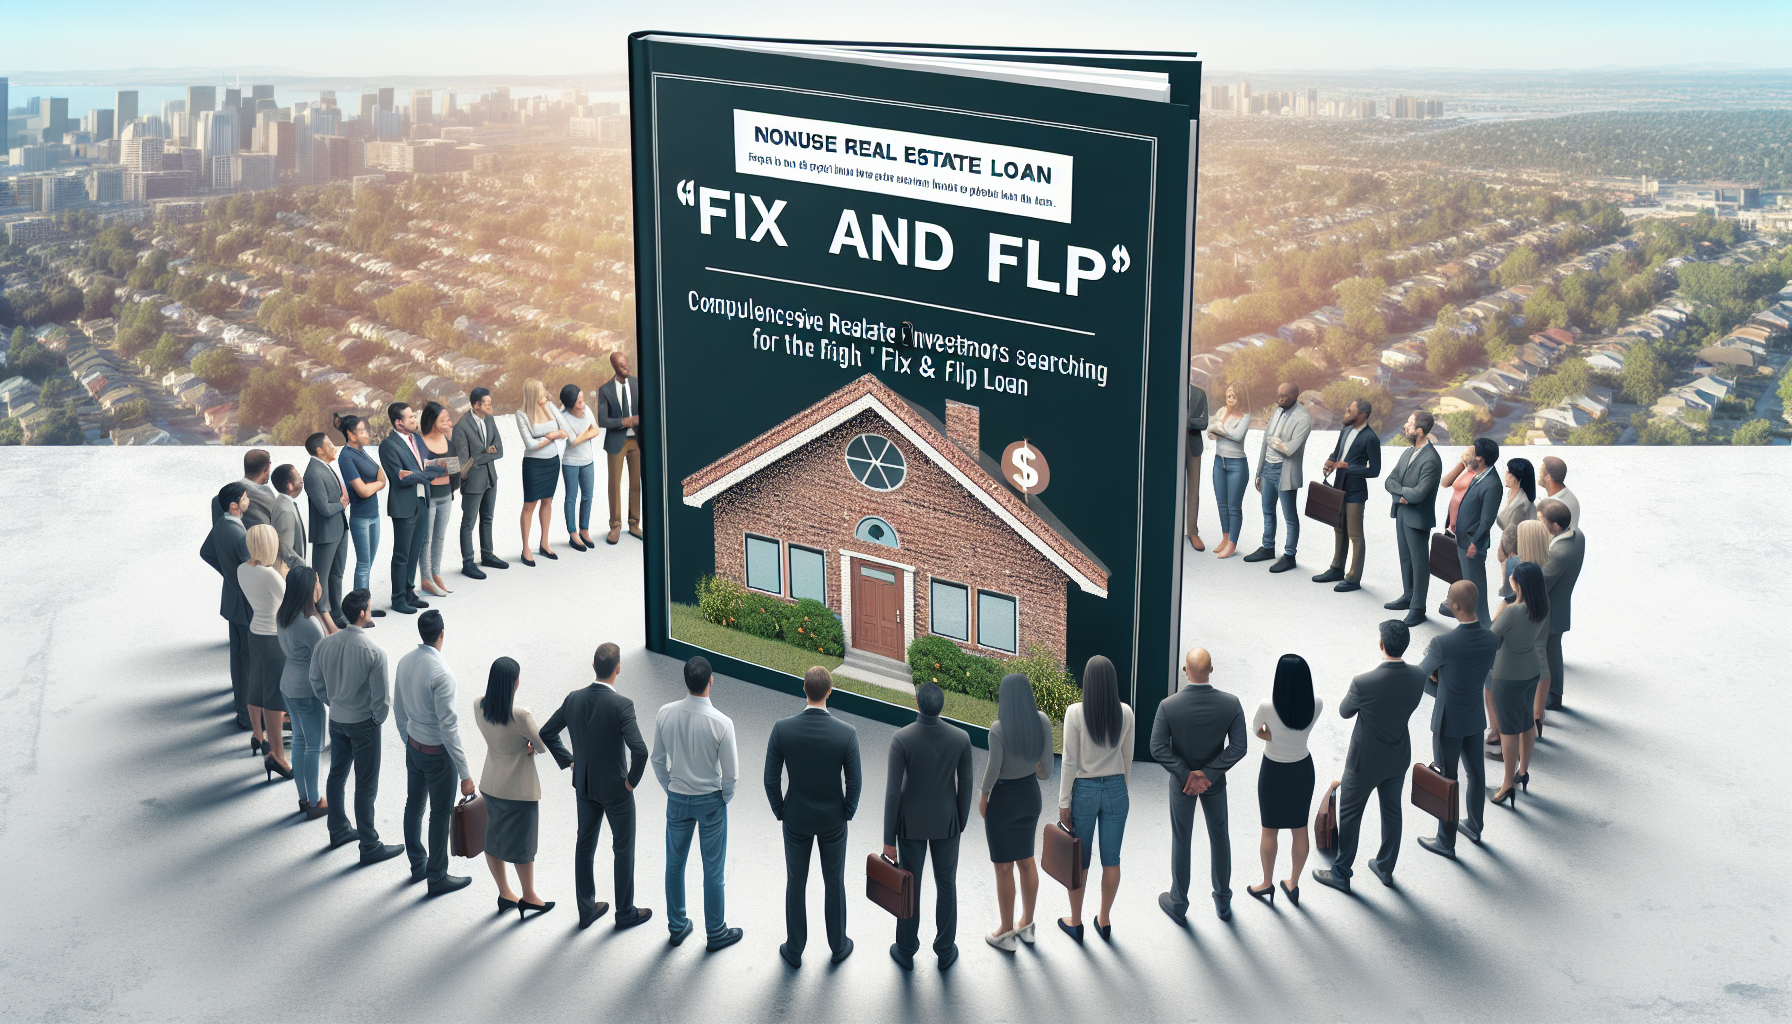 The ultimate guide to getting a fix and flip loan